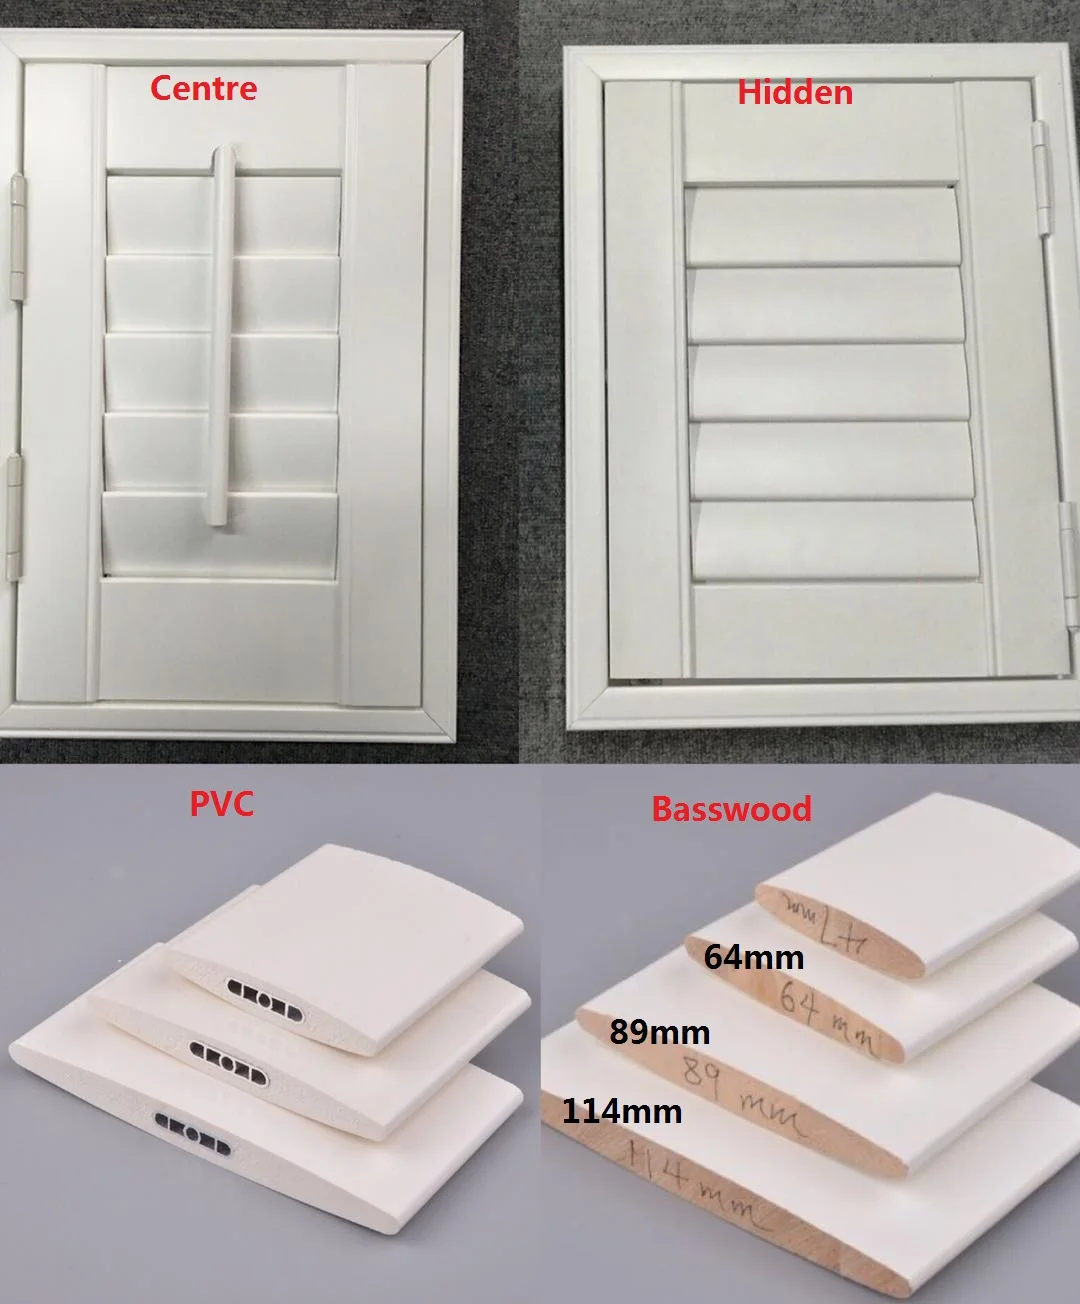 Hot Sale Prue white color interior solid wood window shutter